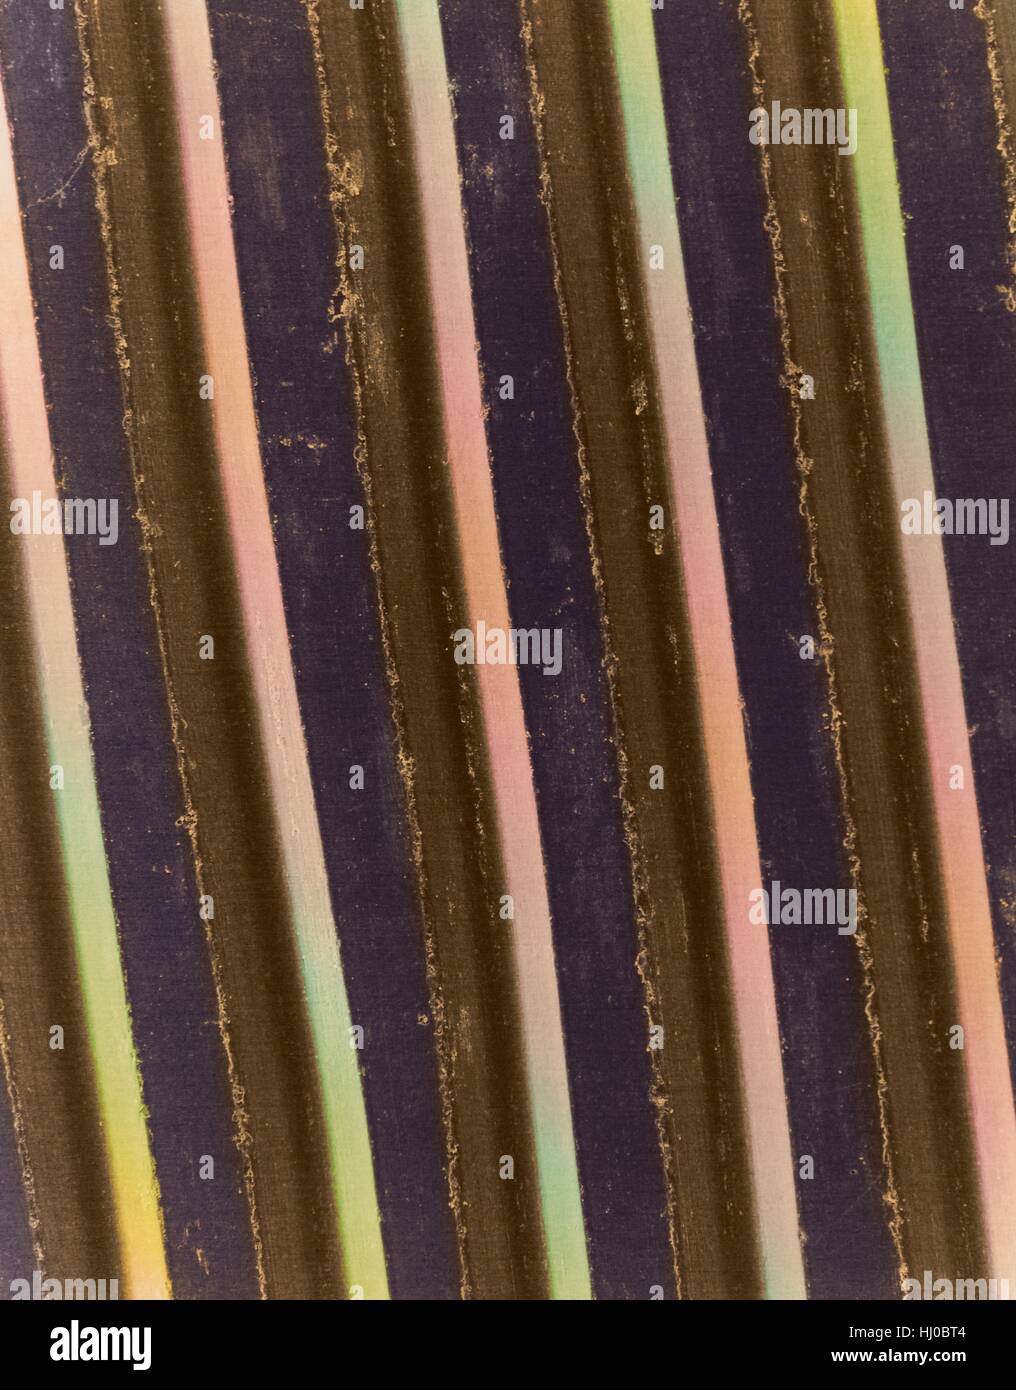 Coloured scanning electron micrograph (SEM) of Surface recording grooves of 78 rpm phonograph record.Early disc phonograph records (also called gramophone records) were made of various materials including hard rubber.From 1897 onwards,earlier materials were largely replaced by rather brittle Stock Photo